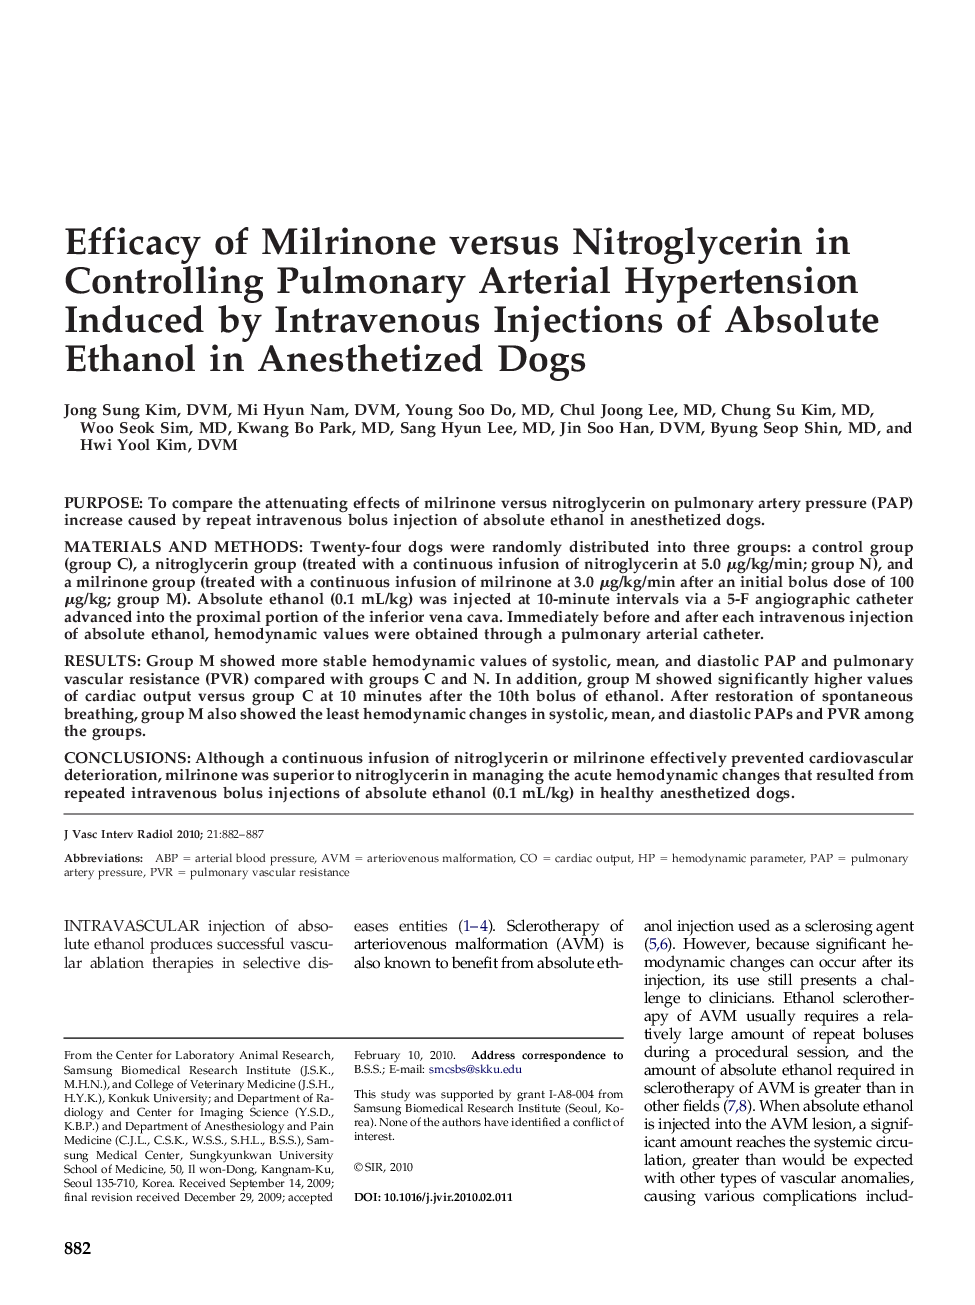 Efficacy of Milrinone versus Nitroglycerin in Controlling Pulmonary Arterial Hypertension Induced by Intravenous Injections of Absolute Ethanol in Anesthetized Dogs